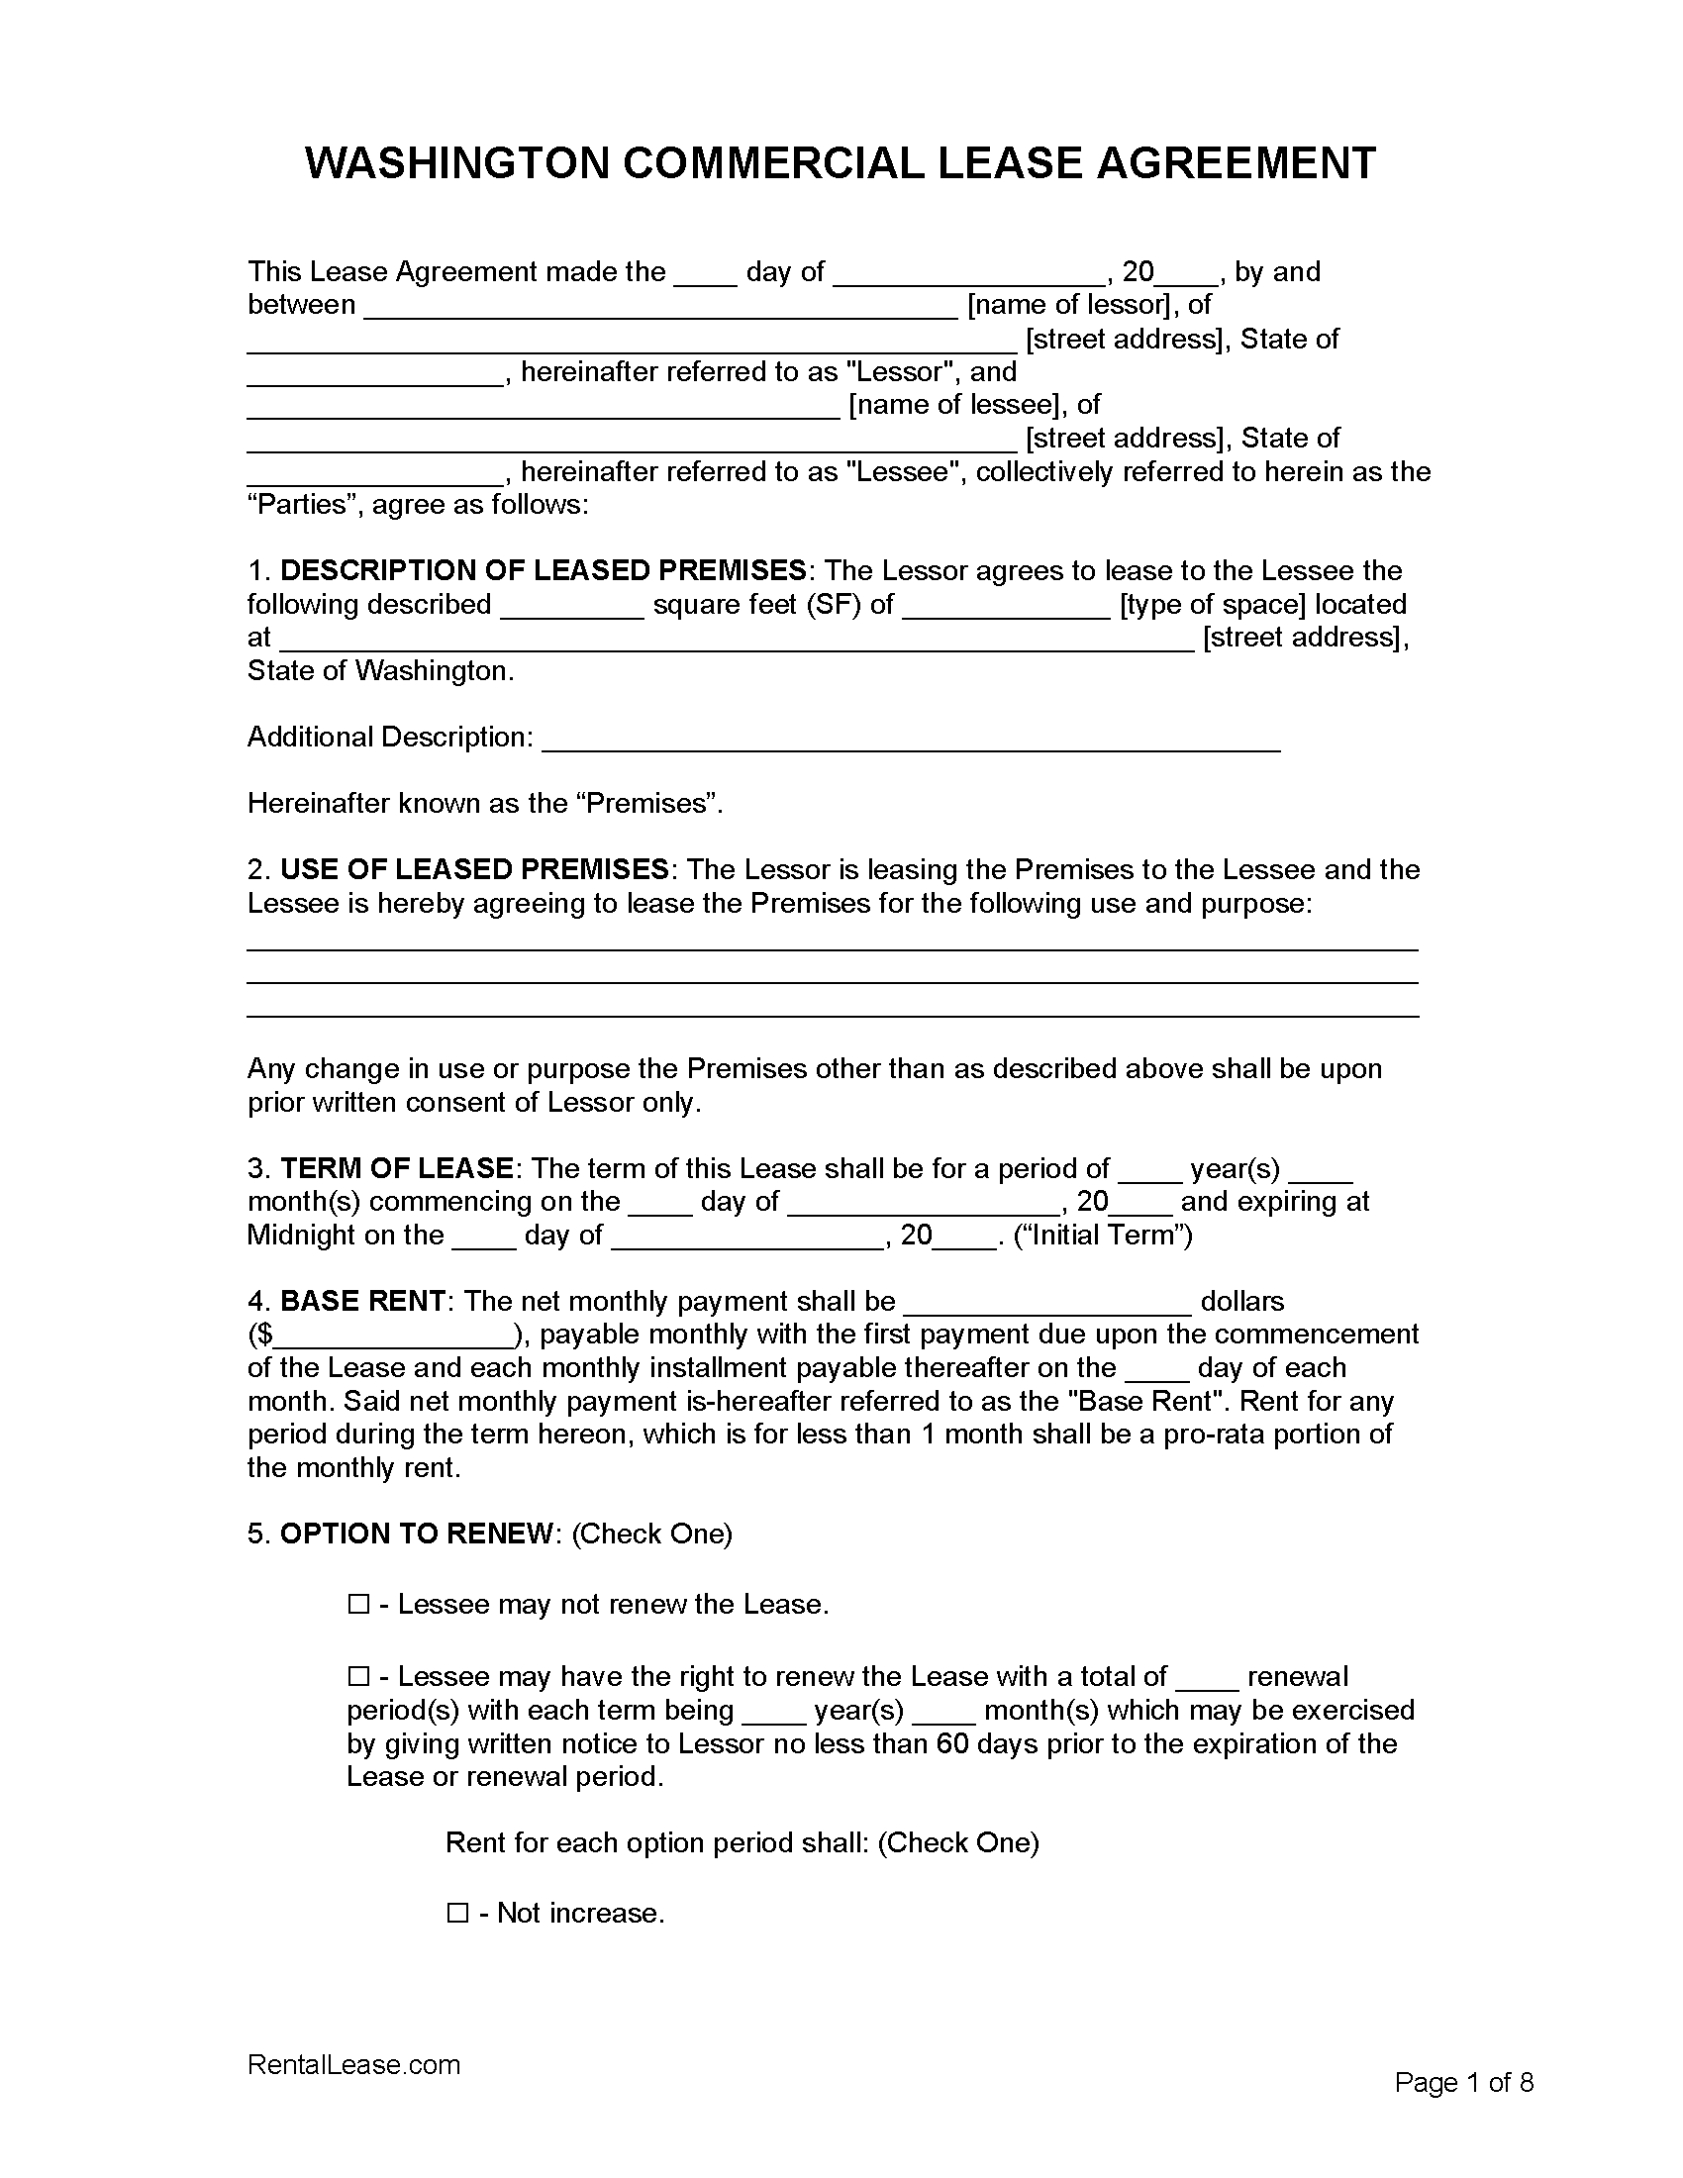 Free Washington Commercial Lease Agreement Template | Pdf | Word Throughout Commercial Lease Agreement Template Word